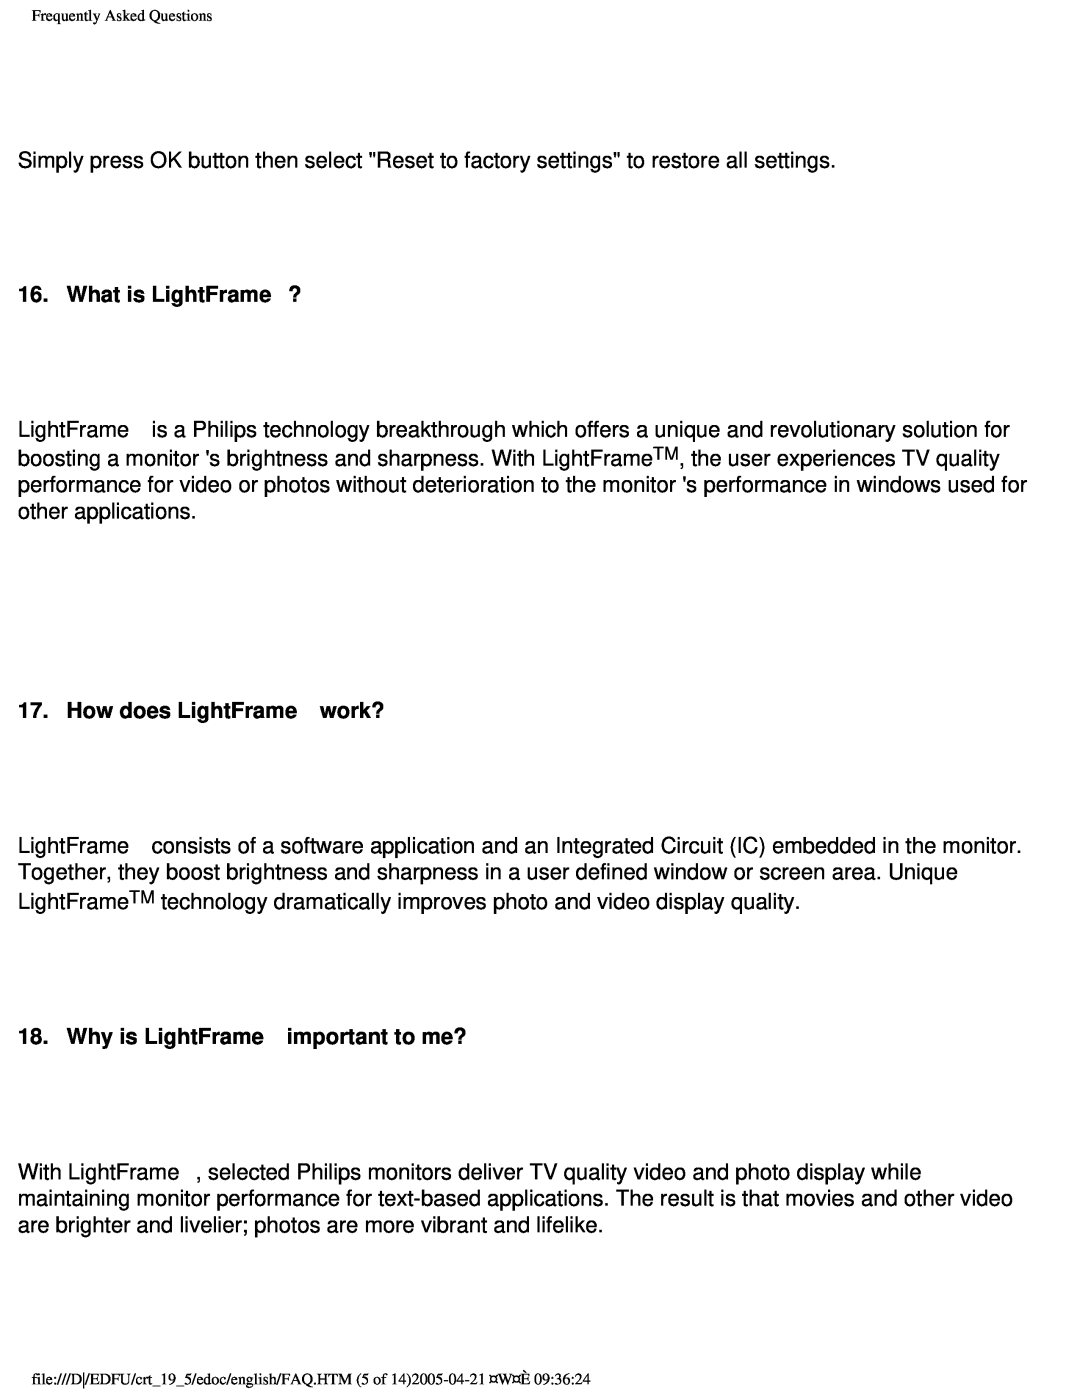 Philips 109F user manual What is LightFrame™?, How does LightFrame™ work?, Why is LightFrame™ important to me? 